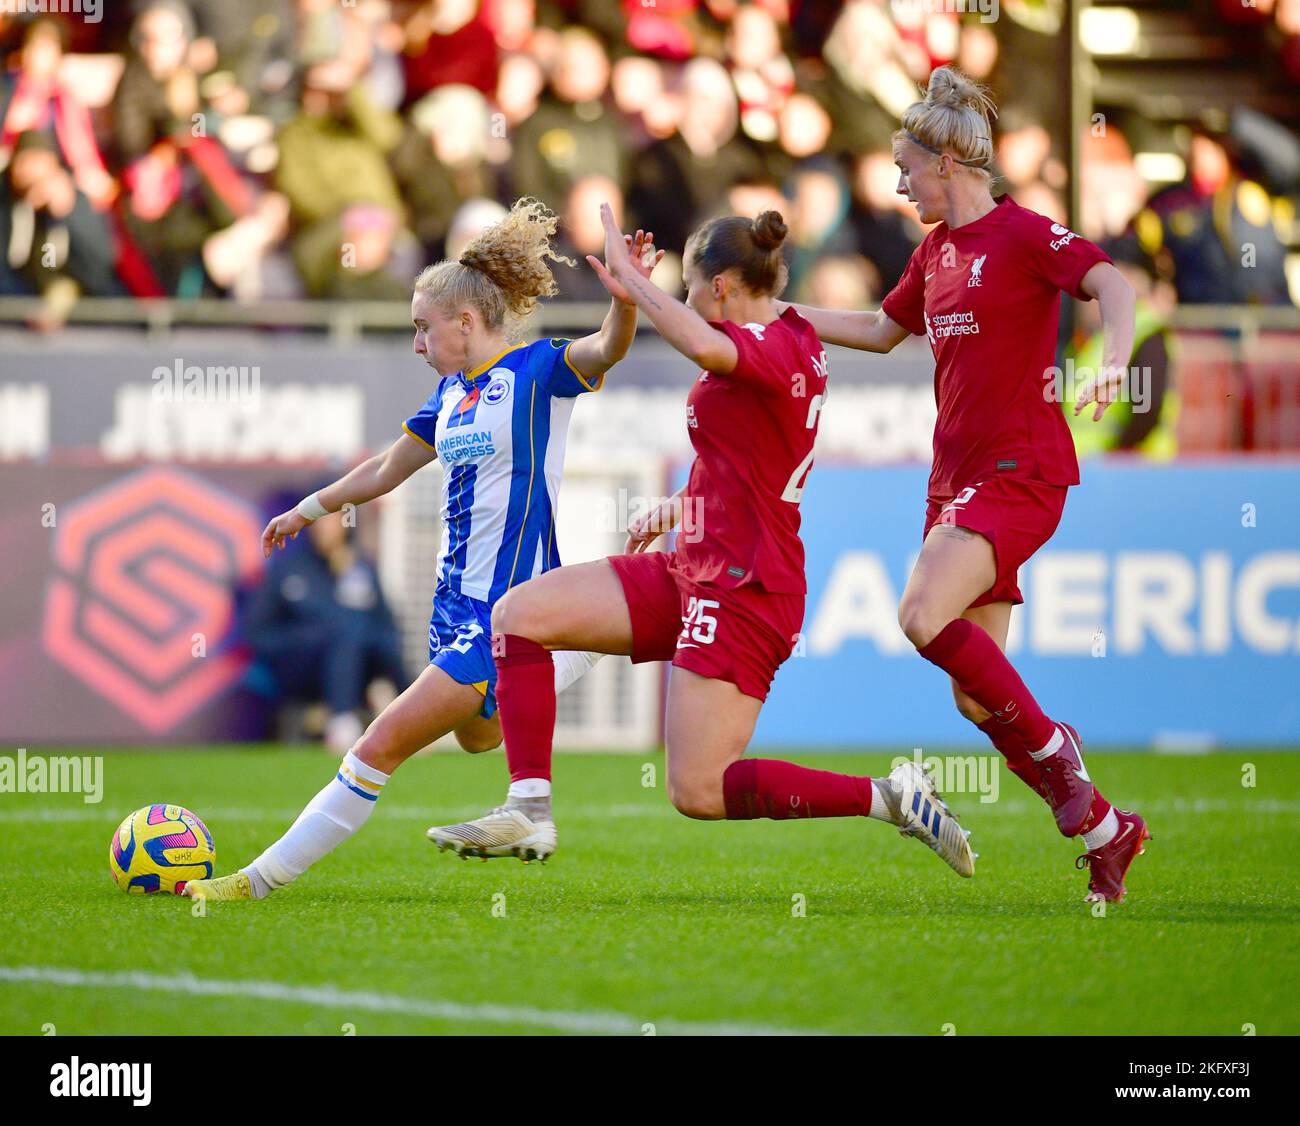 Crawley, UK. 20th Nov, 2022. Gilly Flaherty of Liverpool tries to block the cross ball from Katie Robinson of Brighton and Hove Albion during the FA Women's Super League match between Brighton & Hove Albion Women and Liverpool Women at The People's Pension Stadium on November 20th 2022 in Crawley, United Kingdom. (Photo by Jeff Mood/phcimages.com) Credit: PHC Images/Alamy Live News Stock Photo